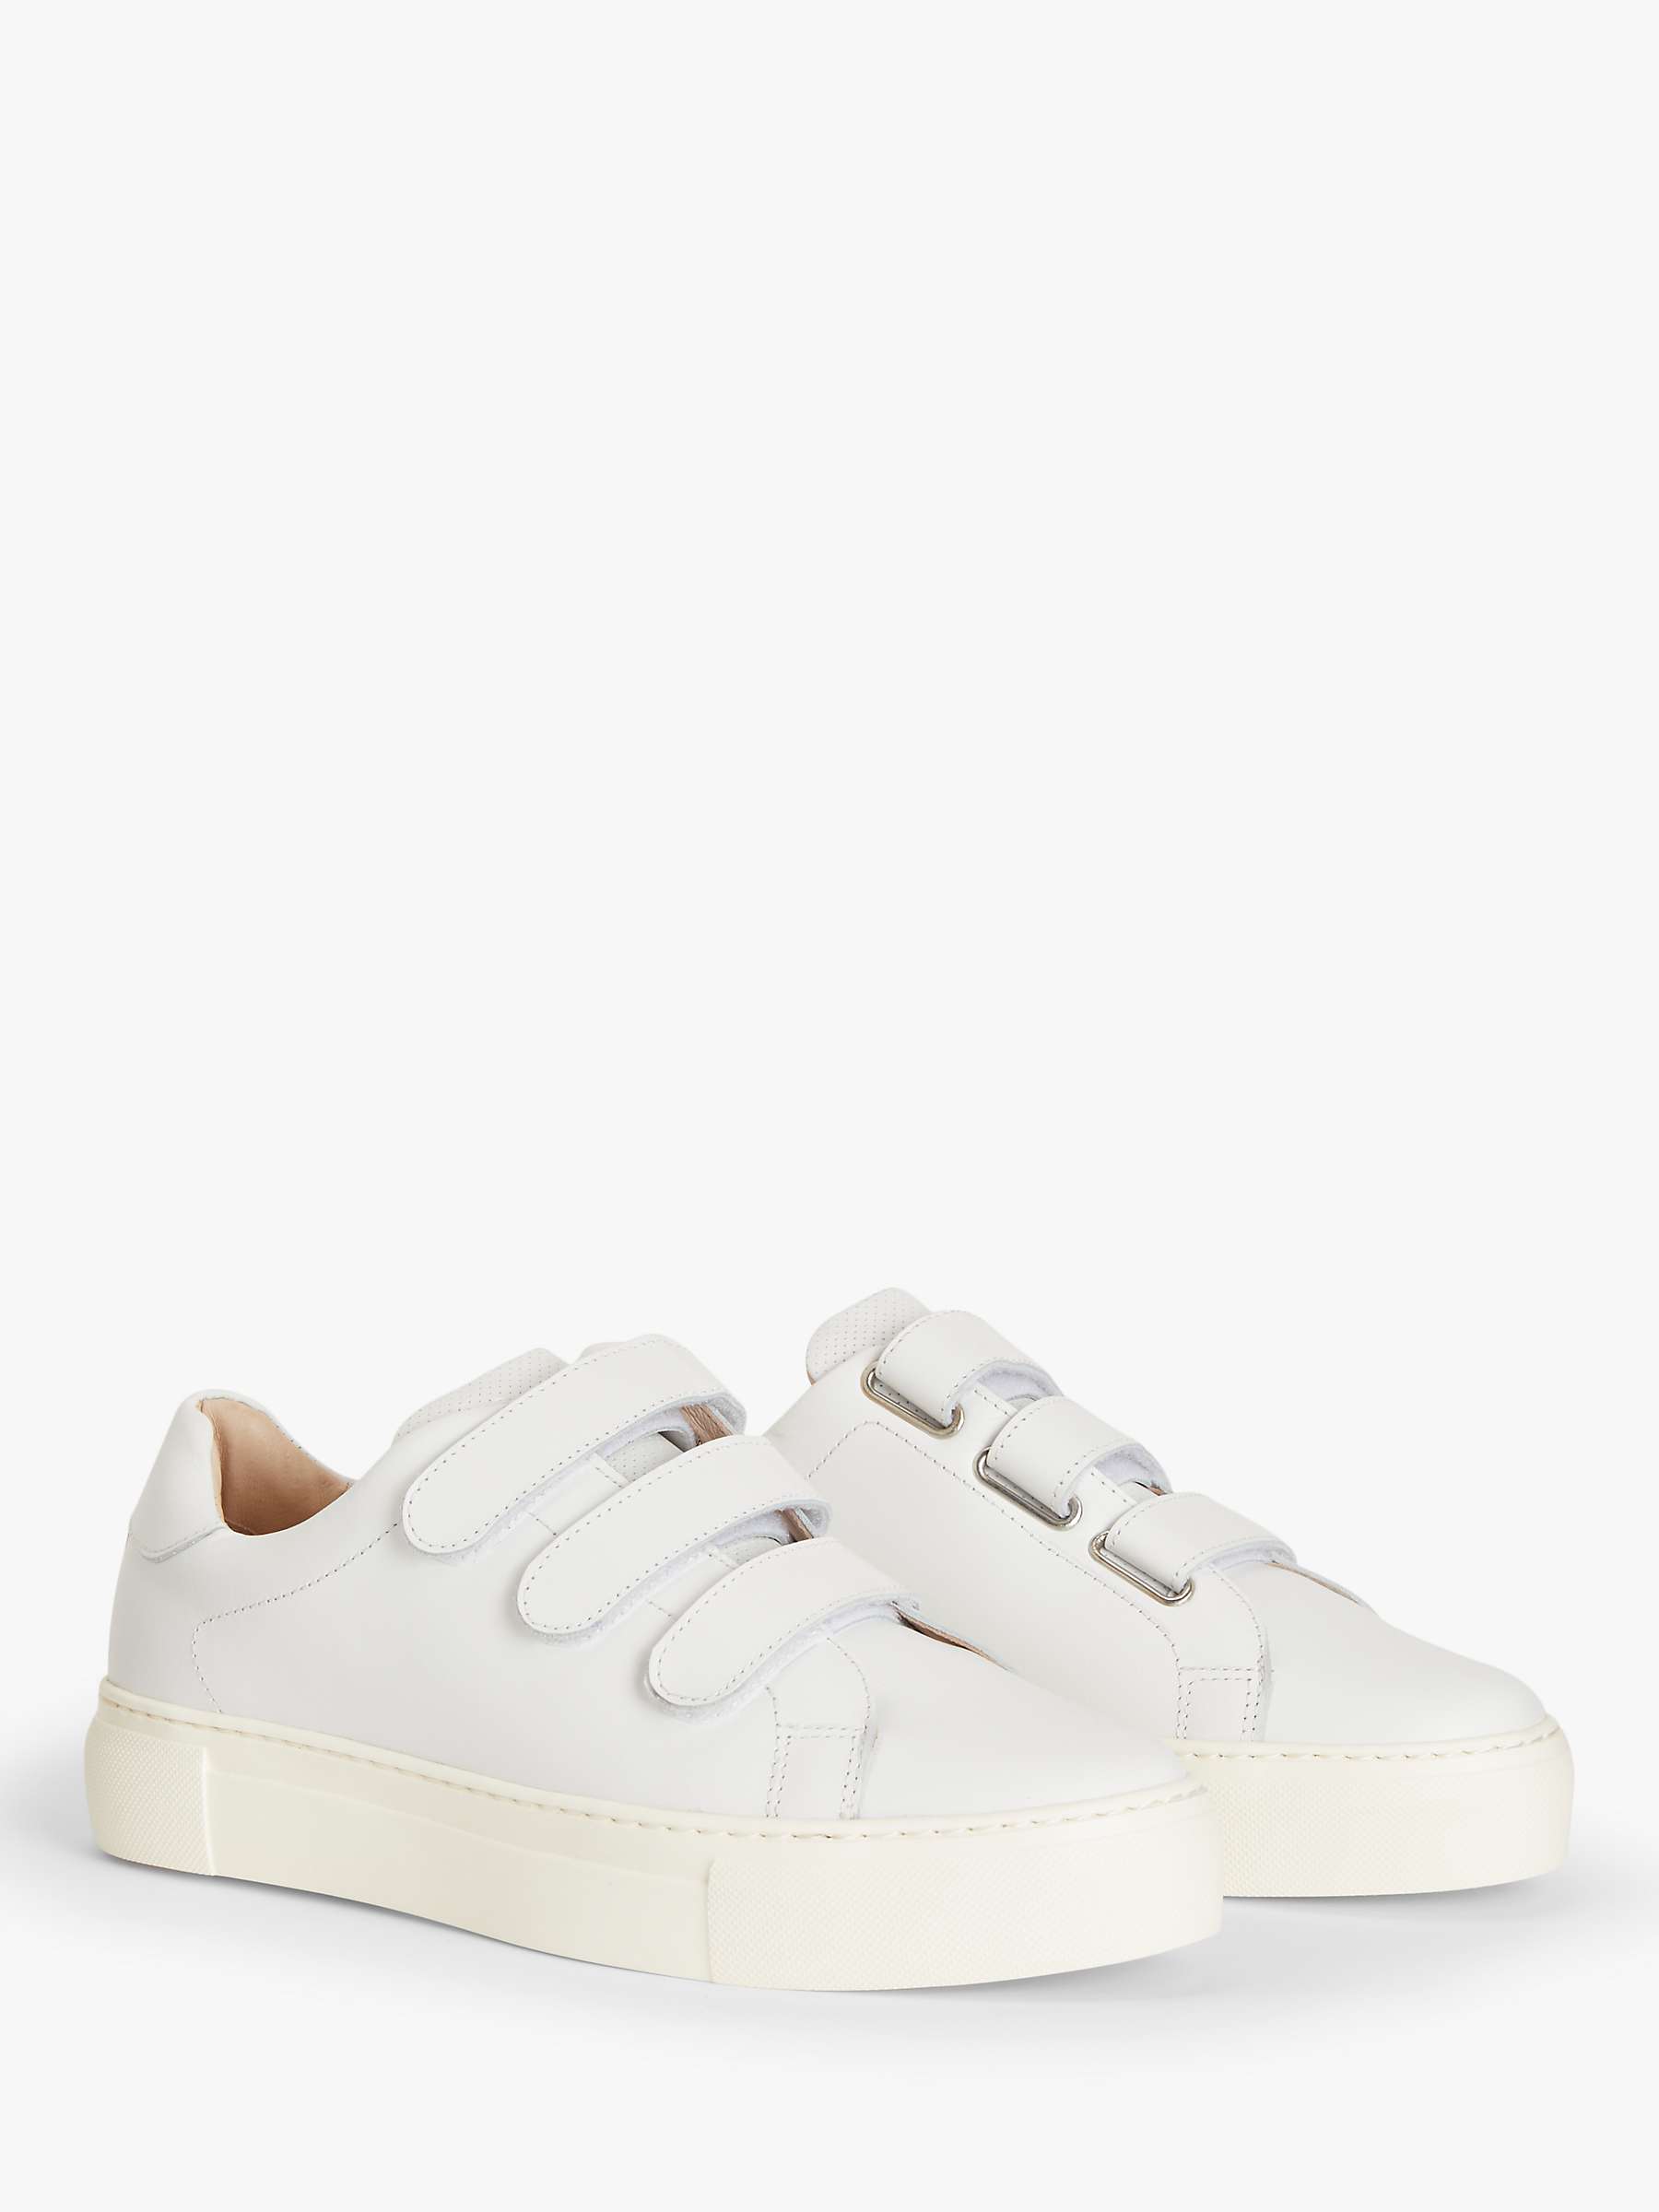 John Lewis Fawne Ripstop Trainers, White Scout at John Lewis & Partners